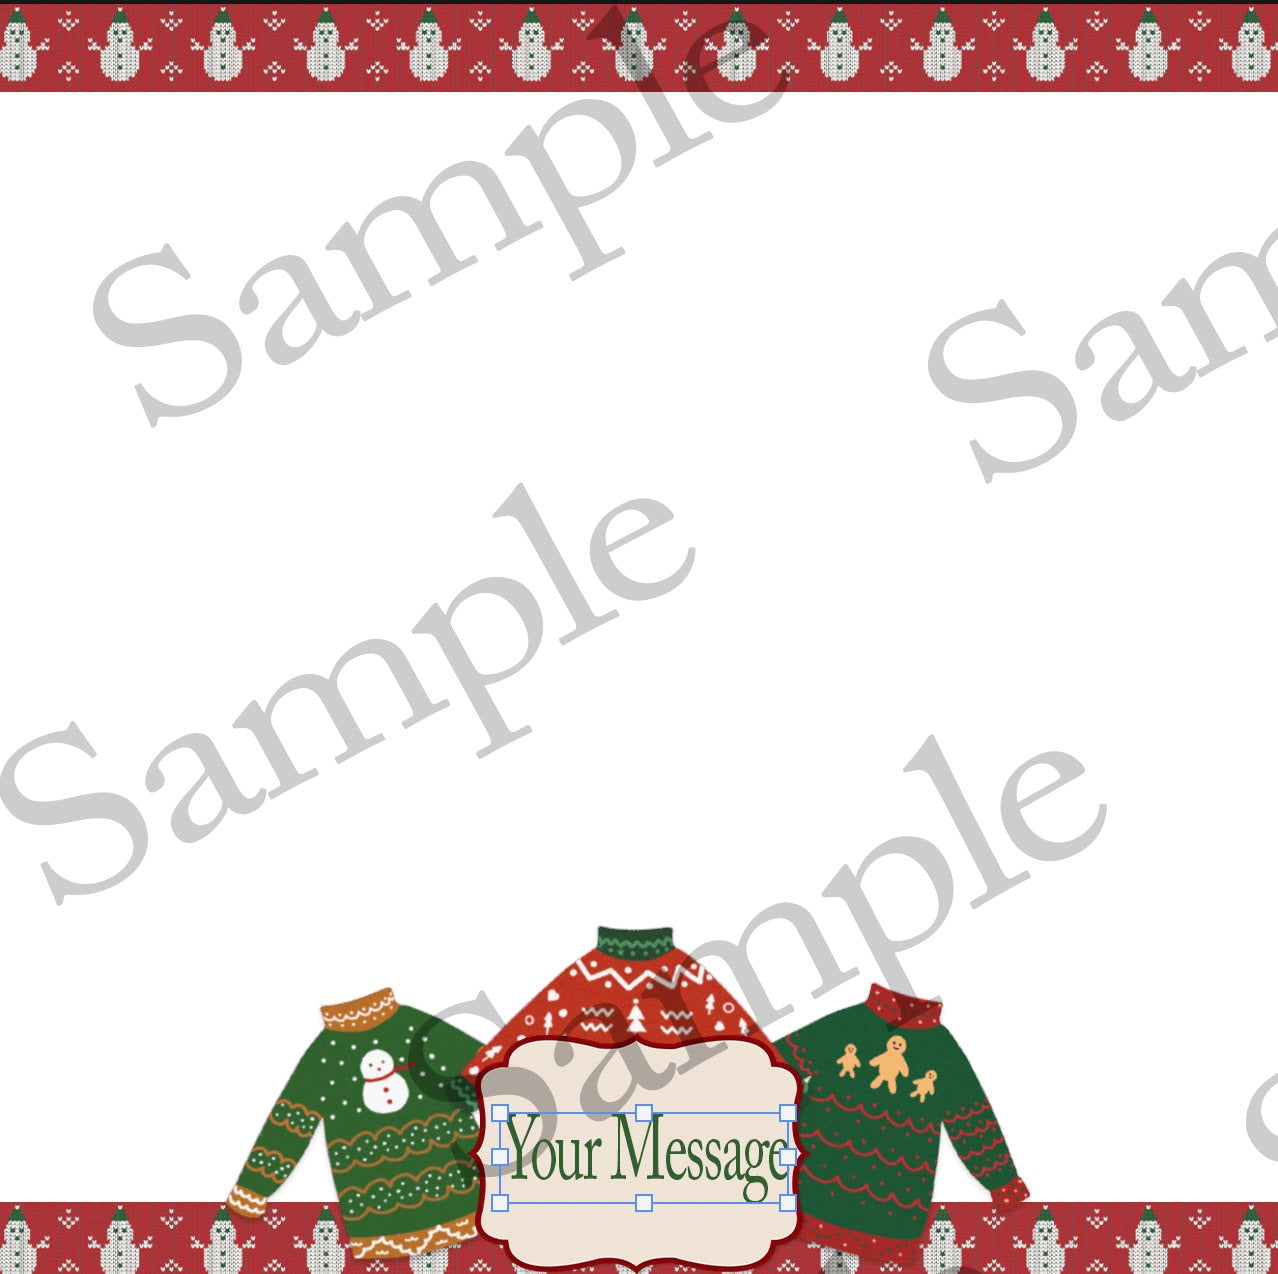 Ugly Sweater Christmas Booth Photo Template, 360 Booth Overlay Filter, Revospin 360 Overlay for Any Event, Touchpix 360 Overlay